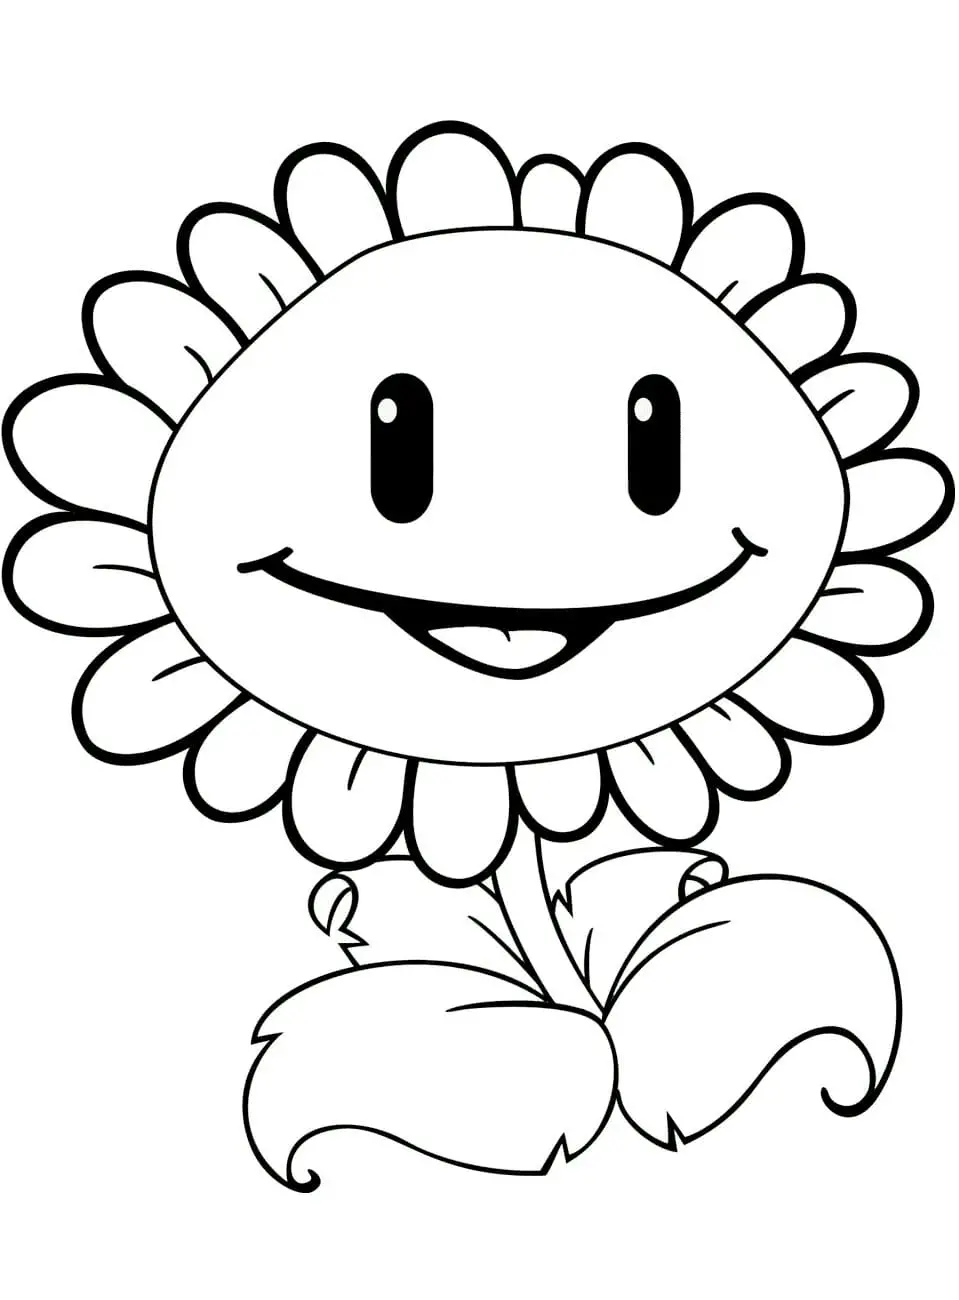 Adorable Plants Vs Zombies 2 Coloring Page